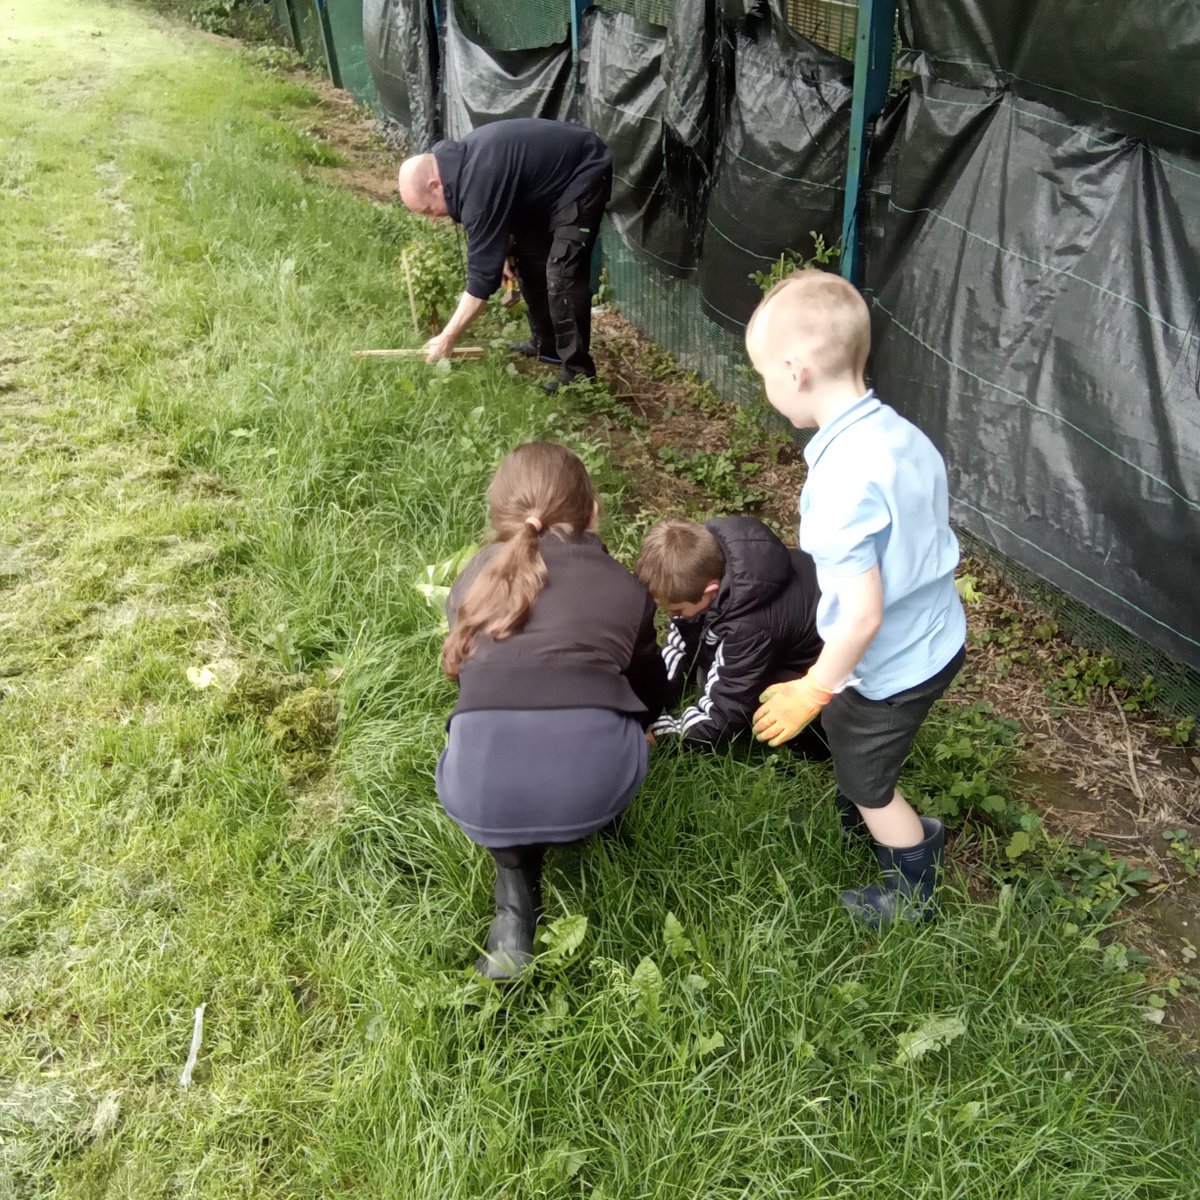 Some of our 'always' children helping Mr Lamb plant some new trees in the school grounds. So proud of our children who do the right thing every day! @astreaacademies